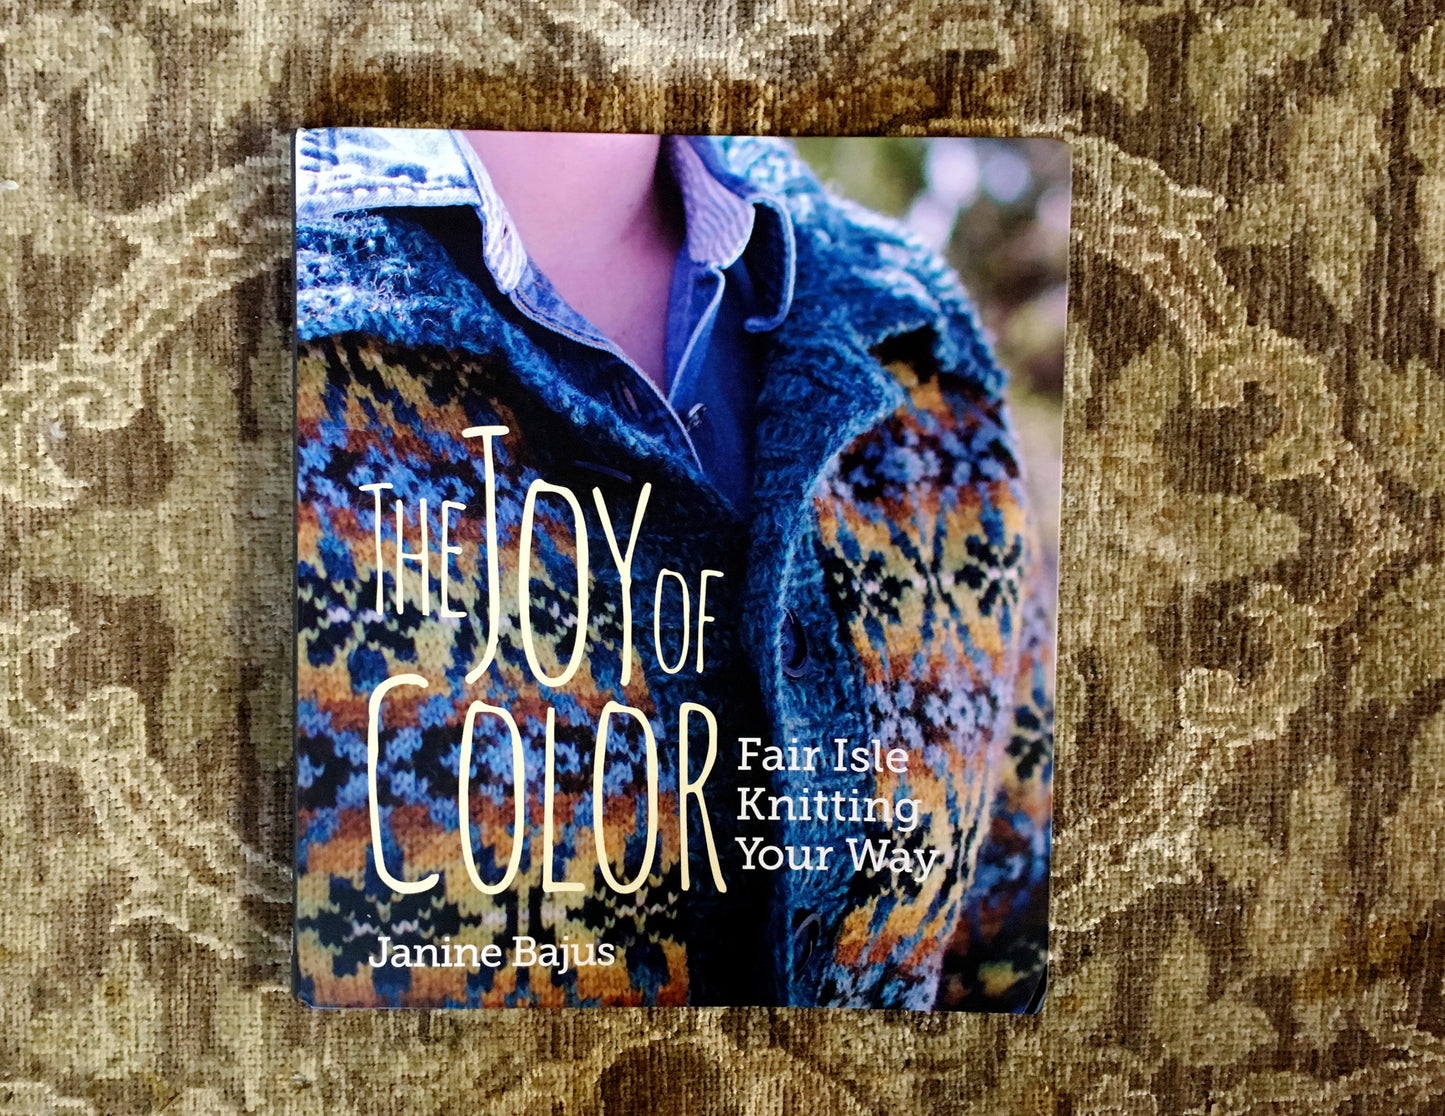 The Joy of Color: Fair Isle Knitting Your Way by Janine Bajus